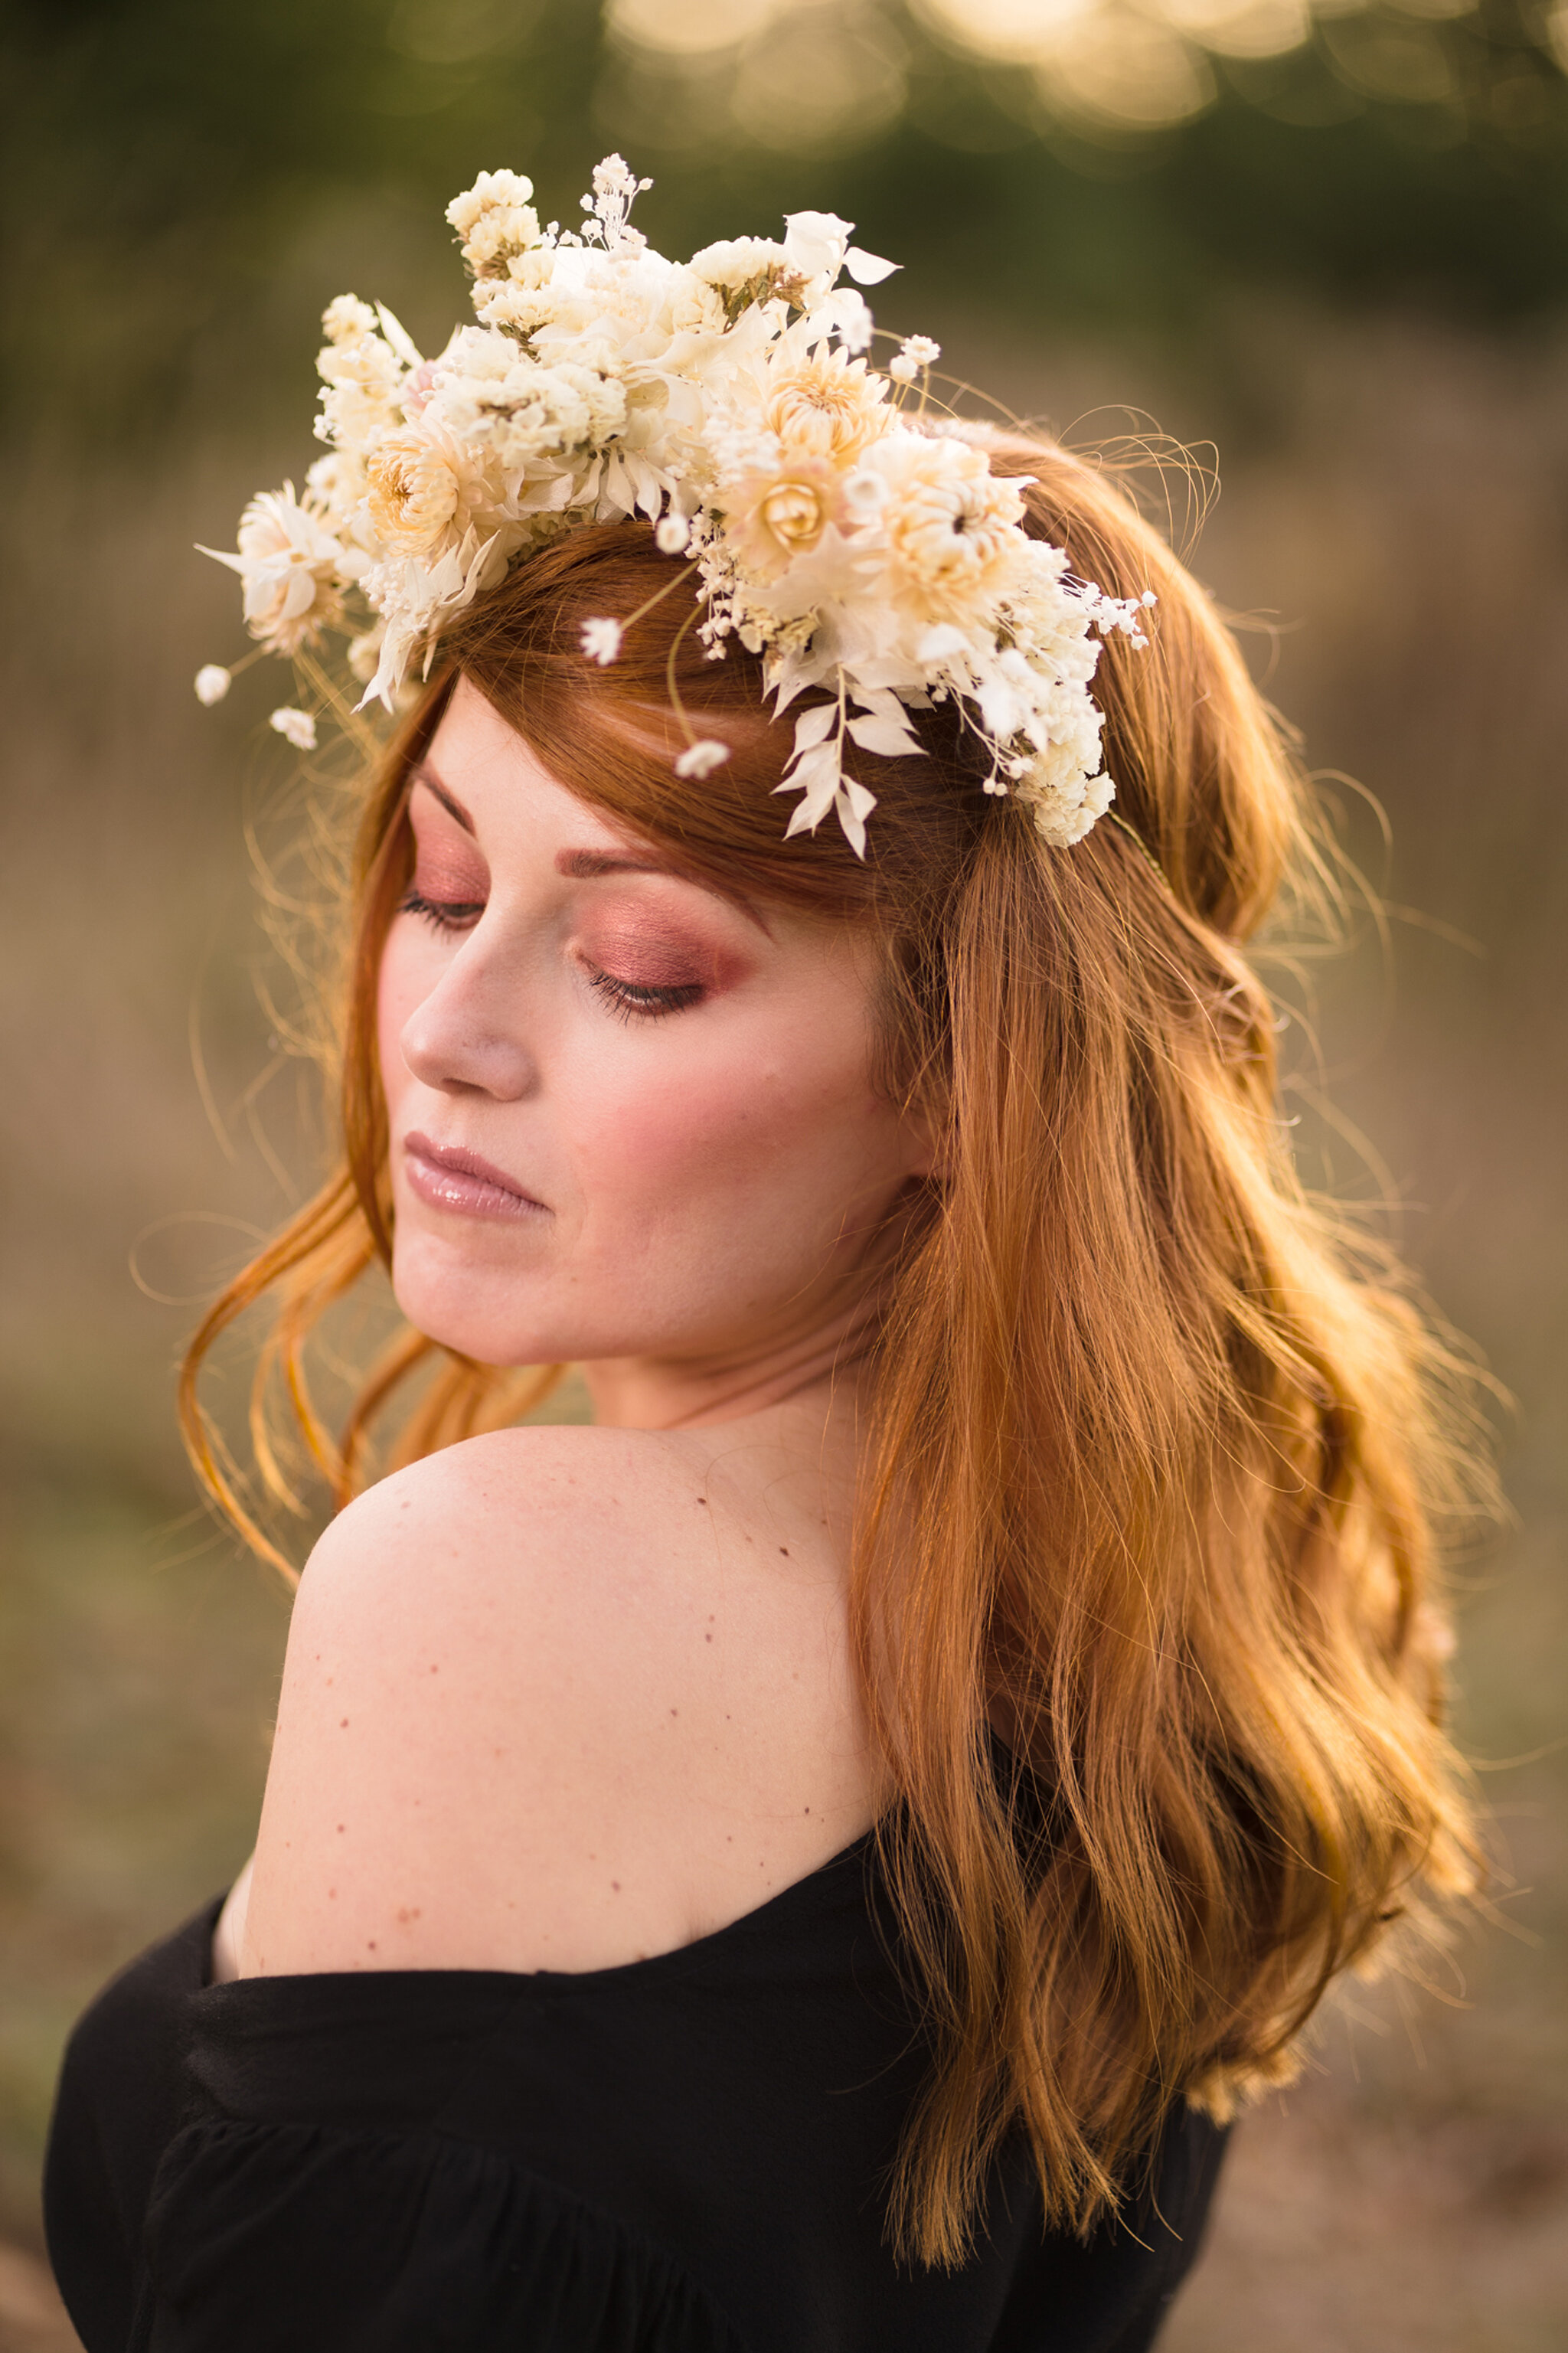 Georgian Bay creative portrait session with flower crown